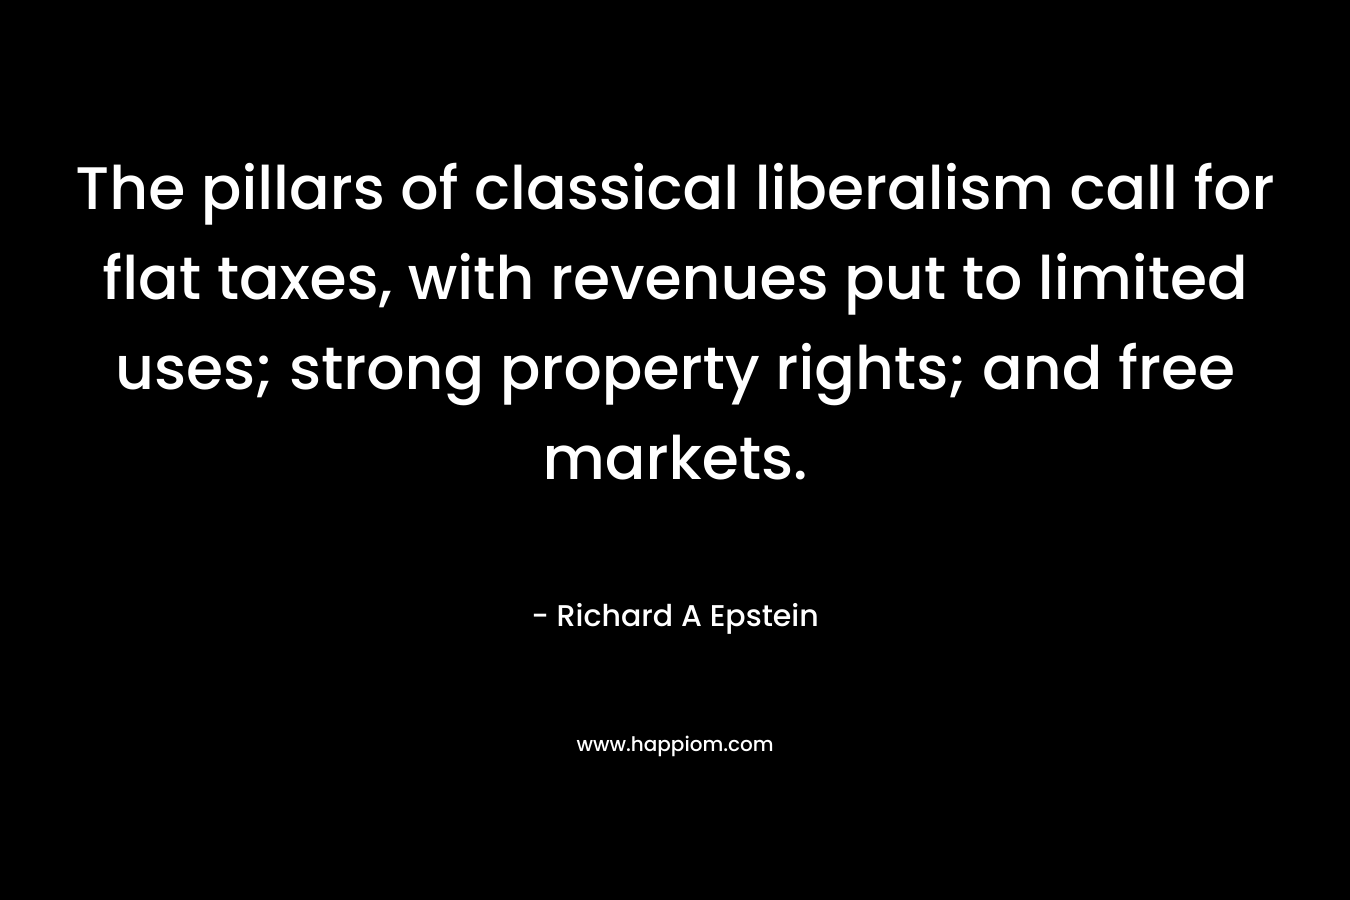 The pillars of classical liberalism call for flat taxes, with revenues put to limited uses; strong property rights; and free markets. – Richard A Epstein